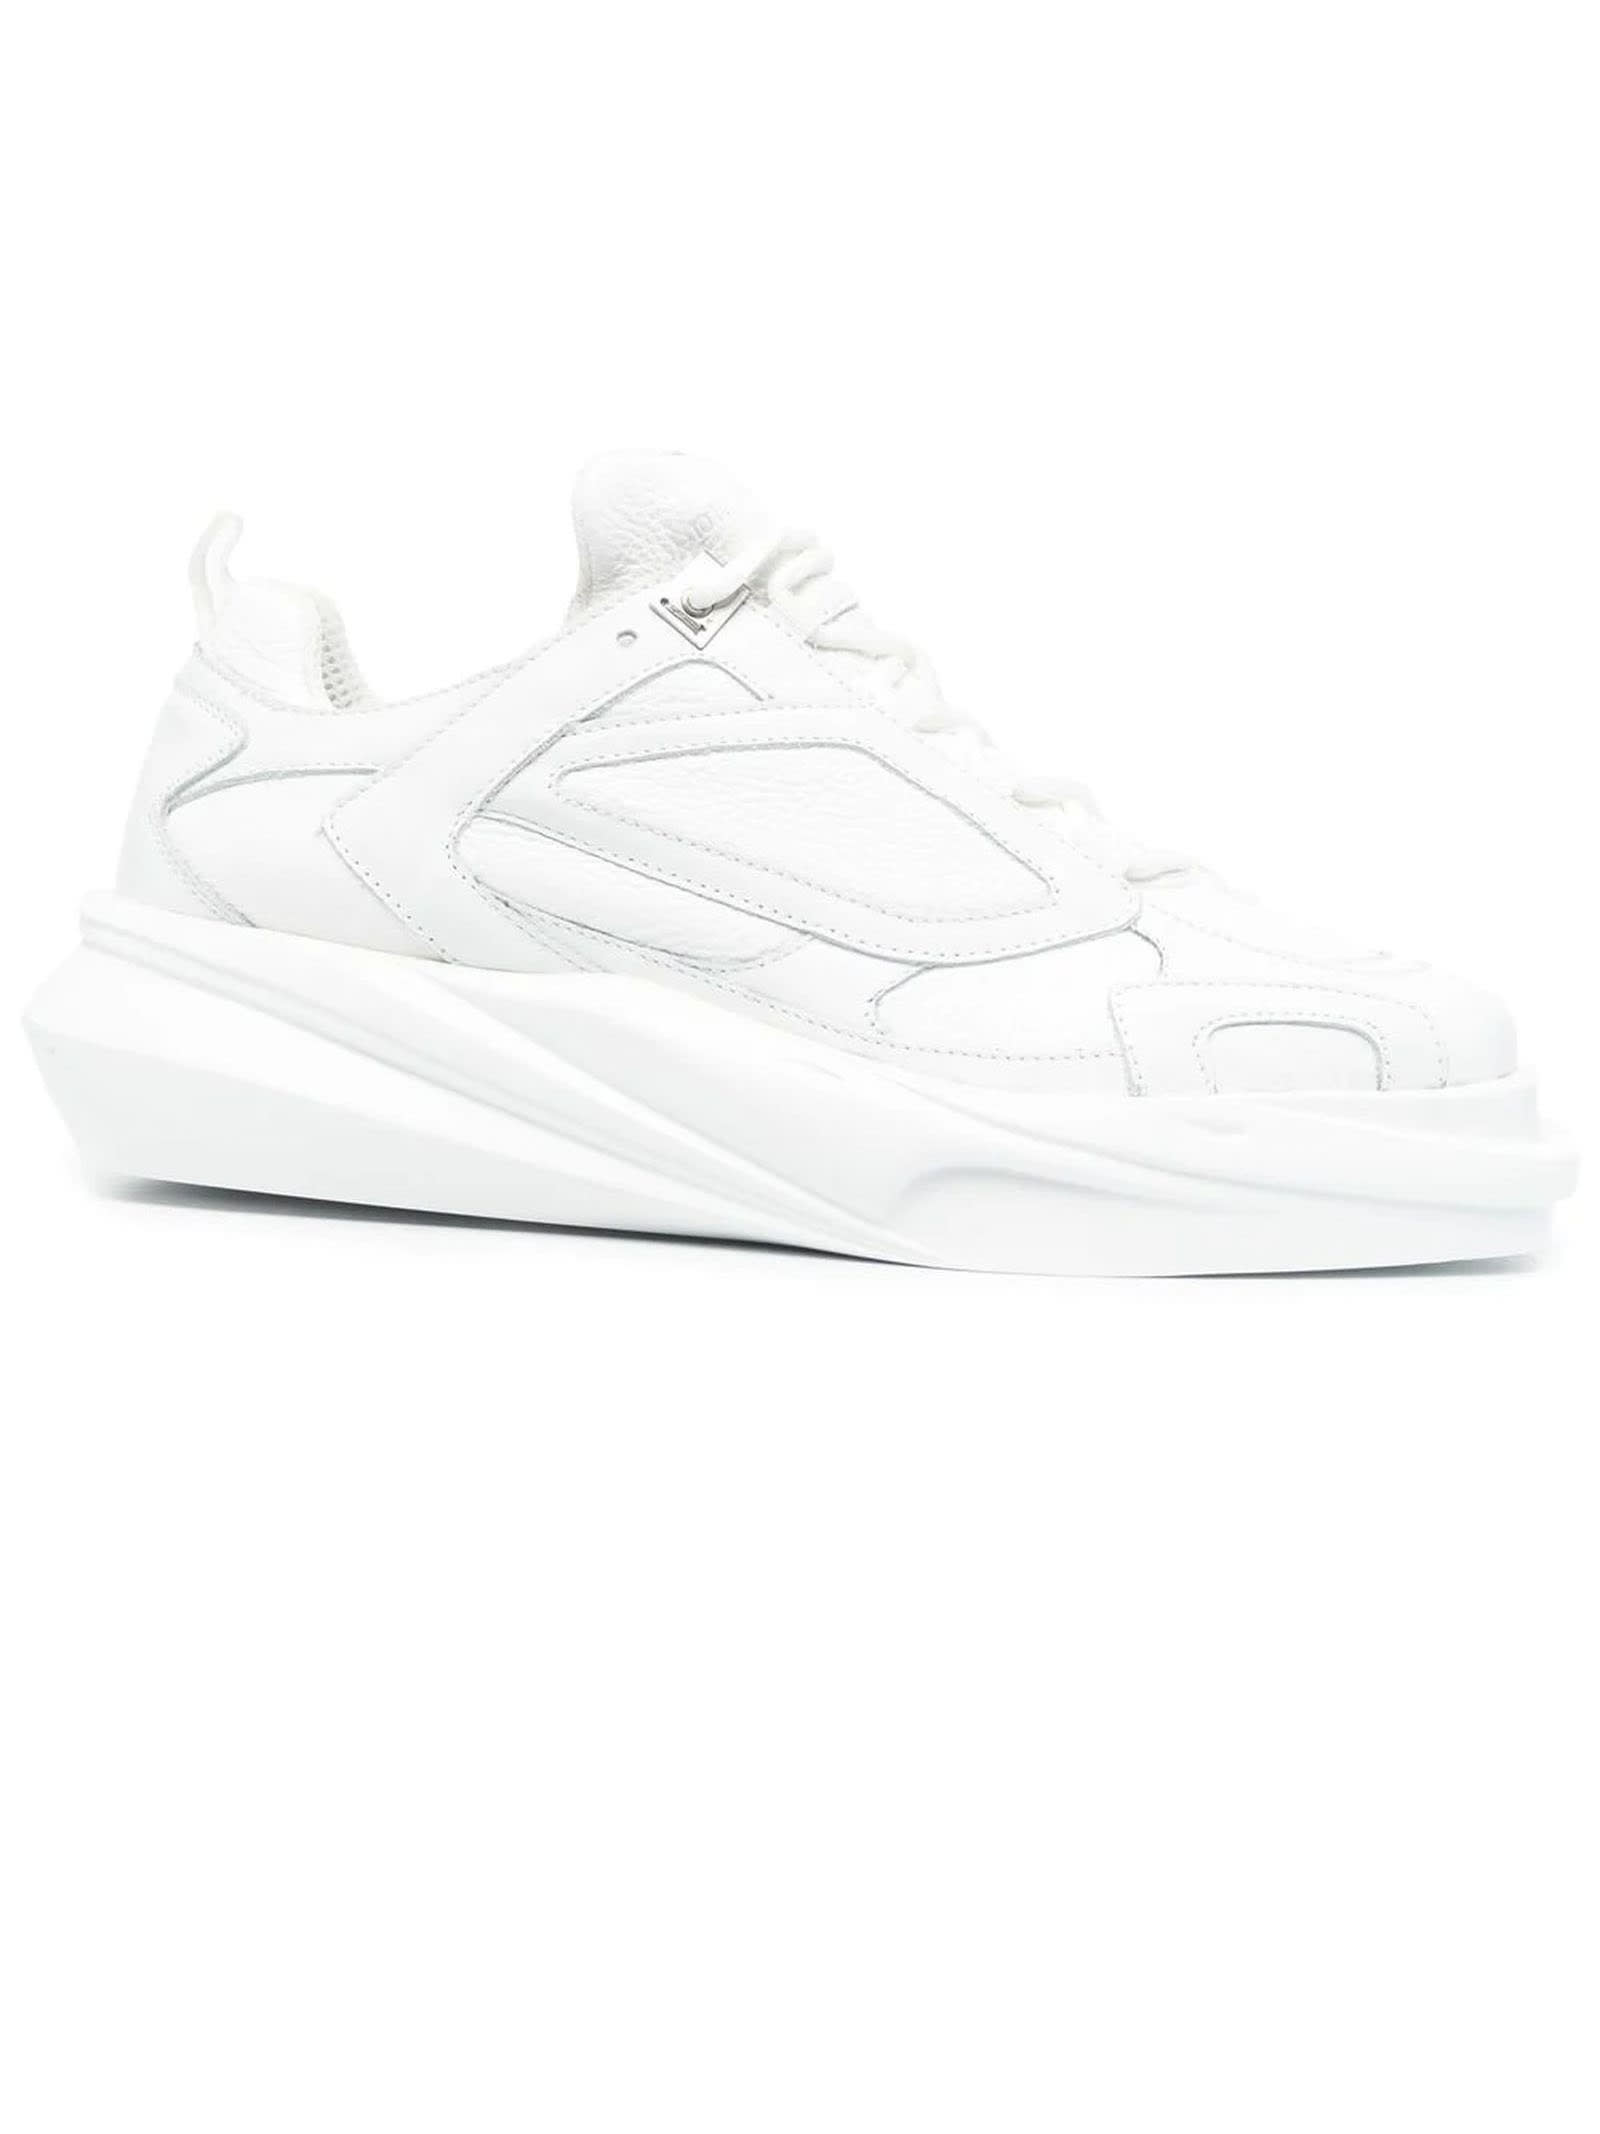 1017 ALYX 9SM White Calf Leather Sneakers